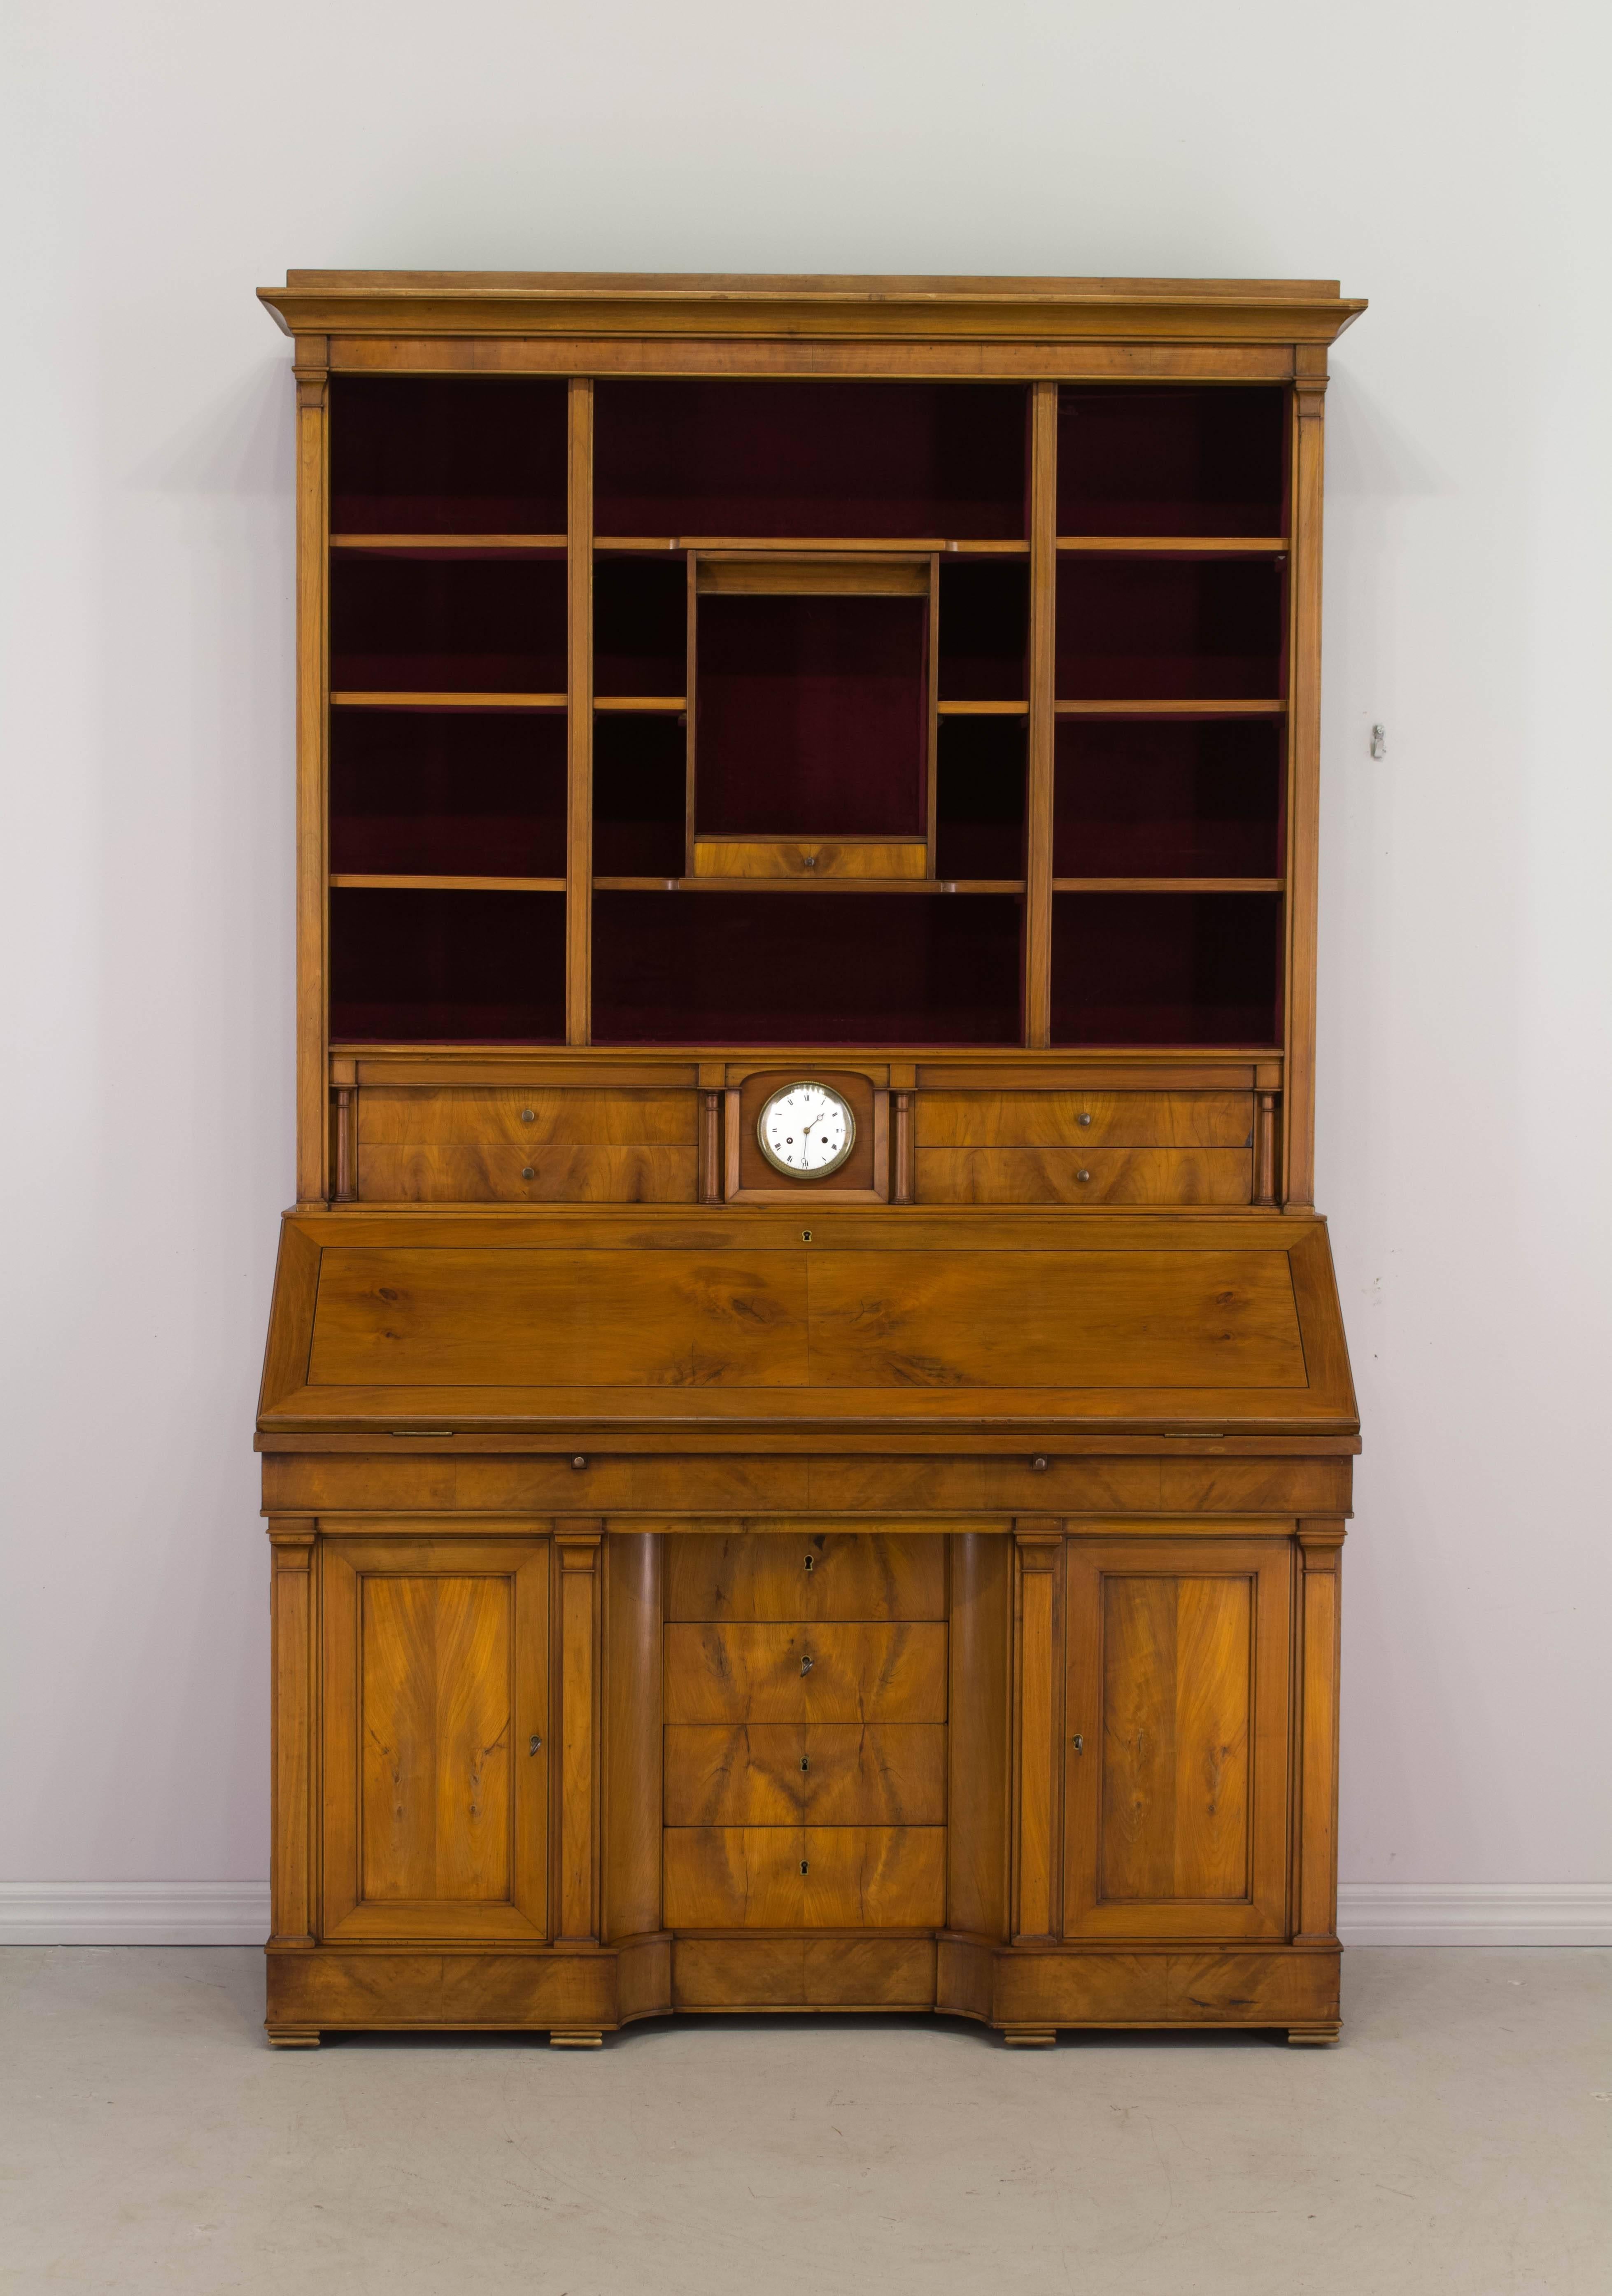 An early 20th century French scriban bibliotheque, made of solid cherrywood with veneer of cherry used as a decorative element on the face of the drawers. From the Loire Valley, this secrétaire was custom built and has several secret compartments.